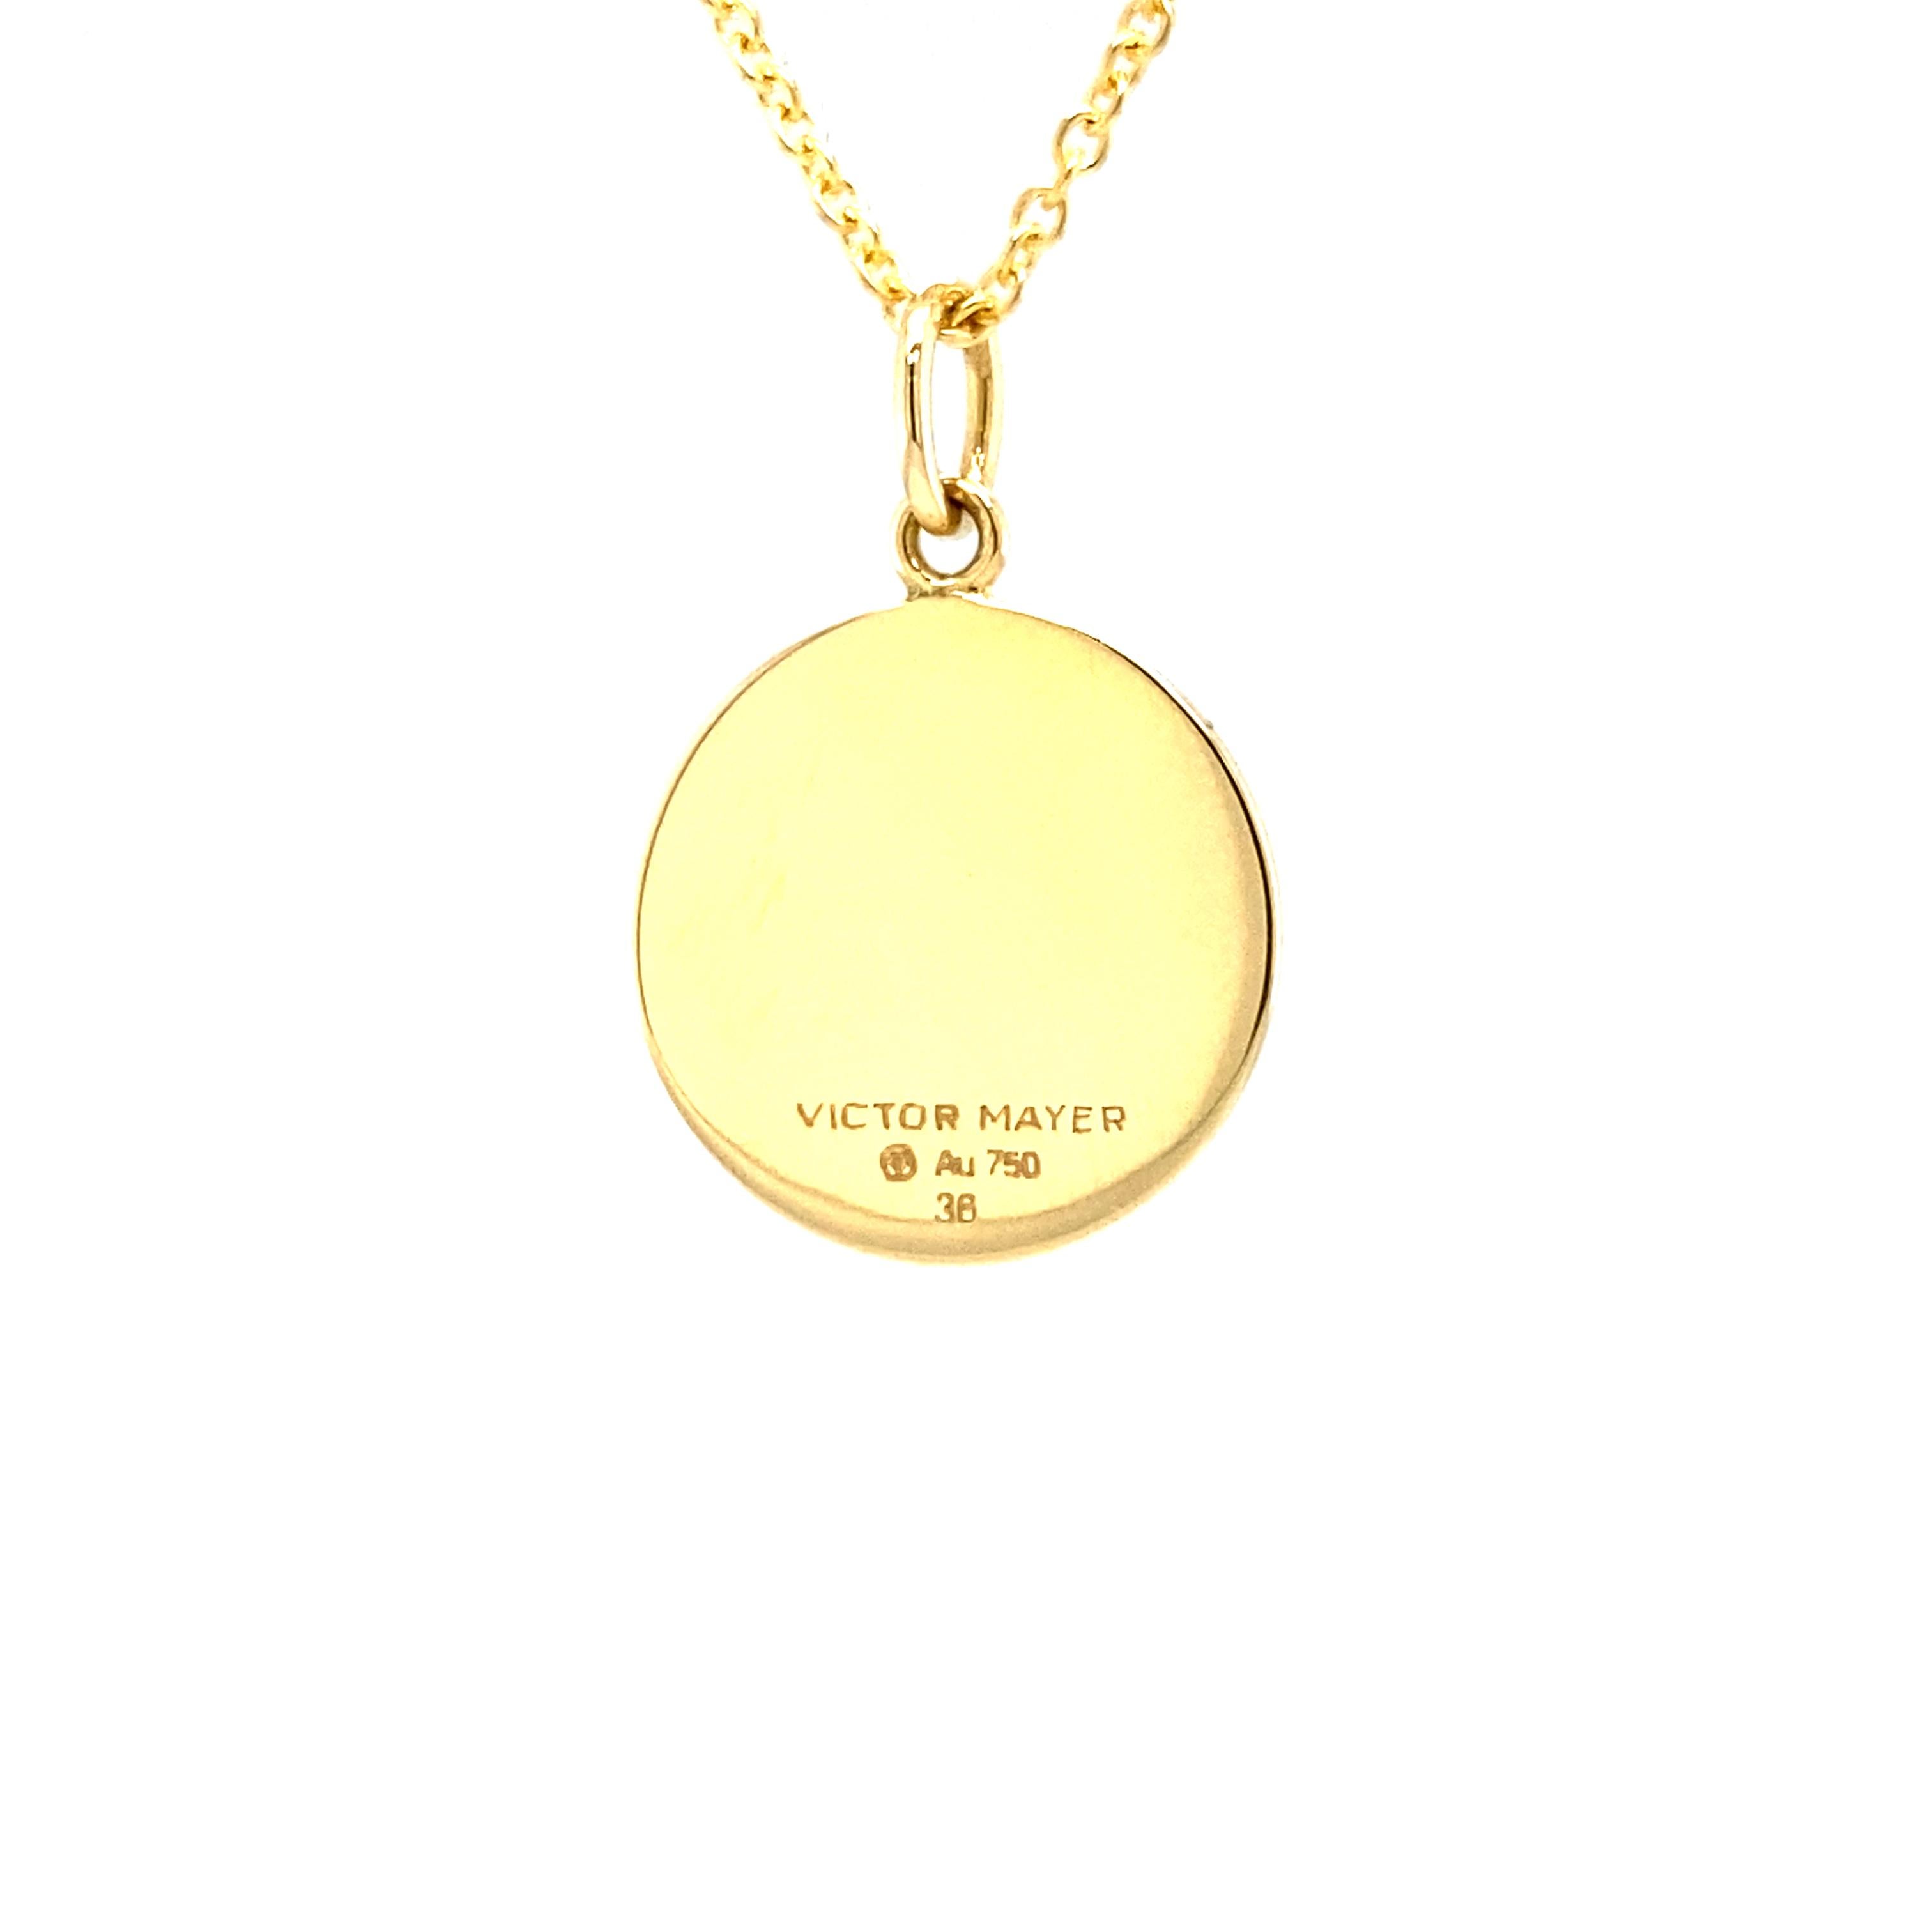 Women's Round Disk Pendant, 18k Yellow Gold, Dark Green Enamel Guilloche Gold Paillons For Sale